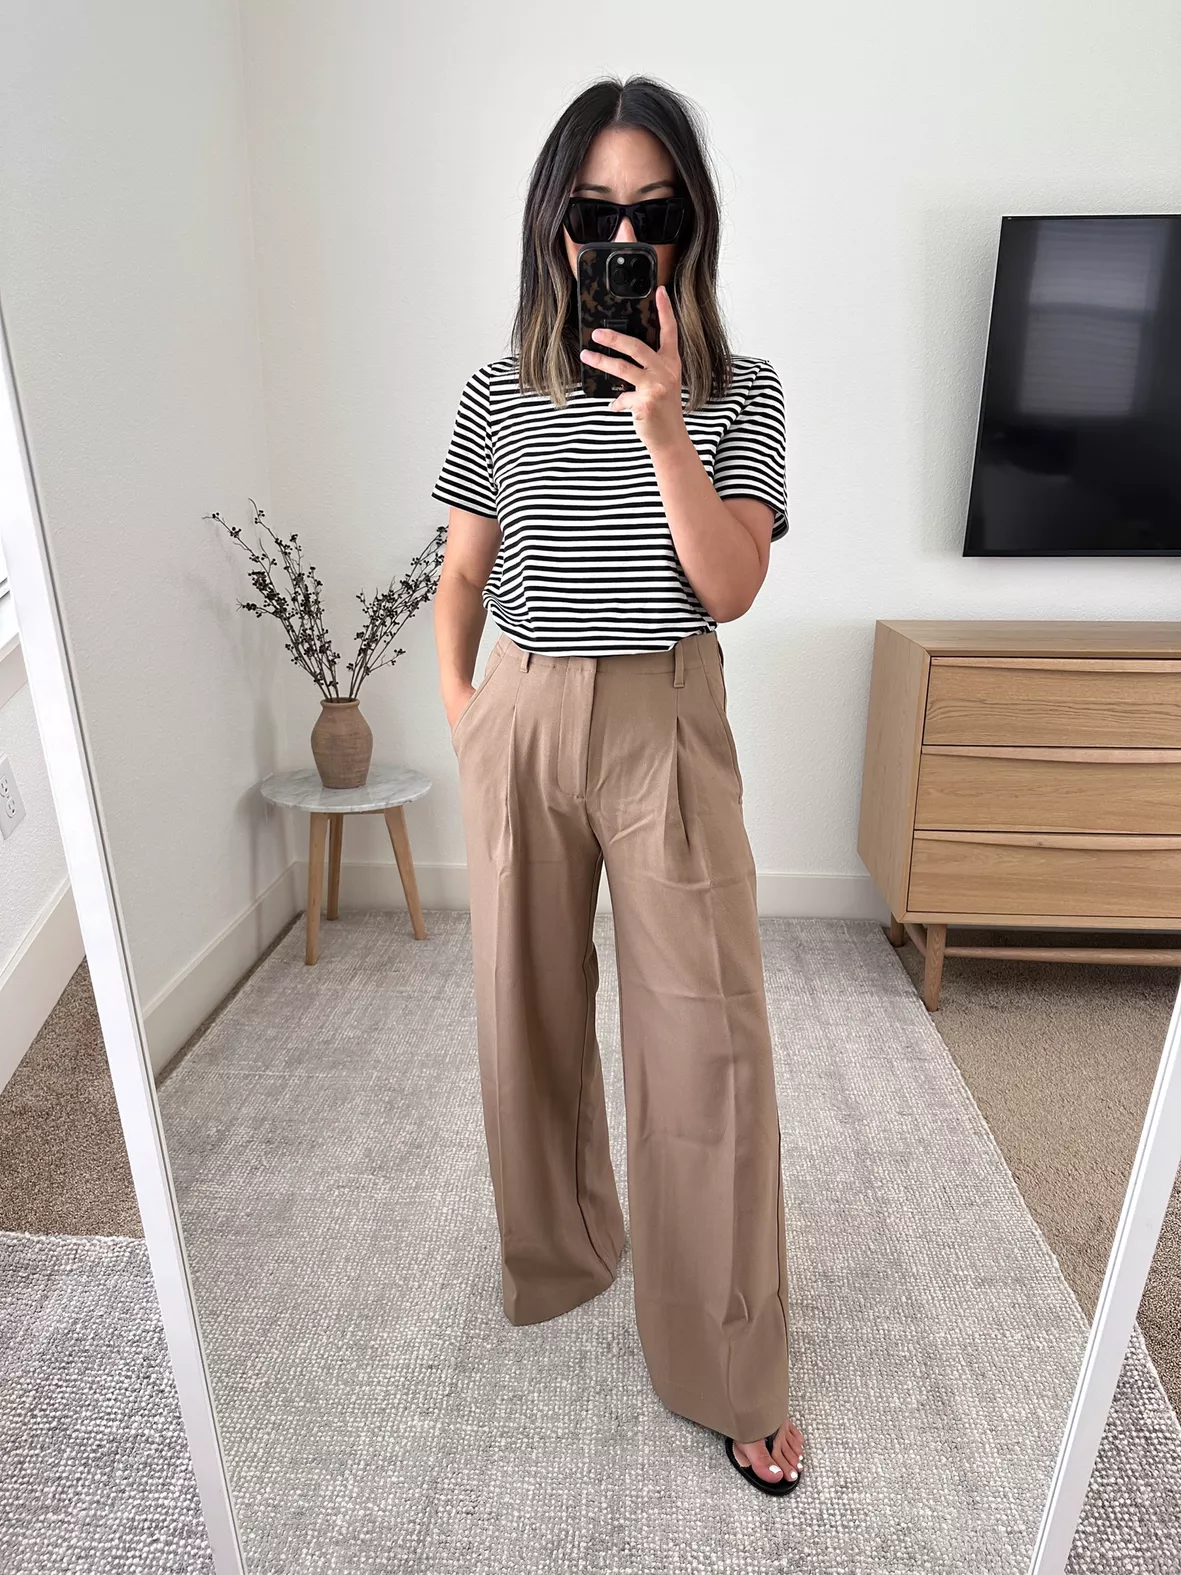 How To Style Wide Legged Pants If You're Short Without